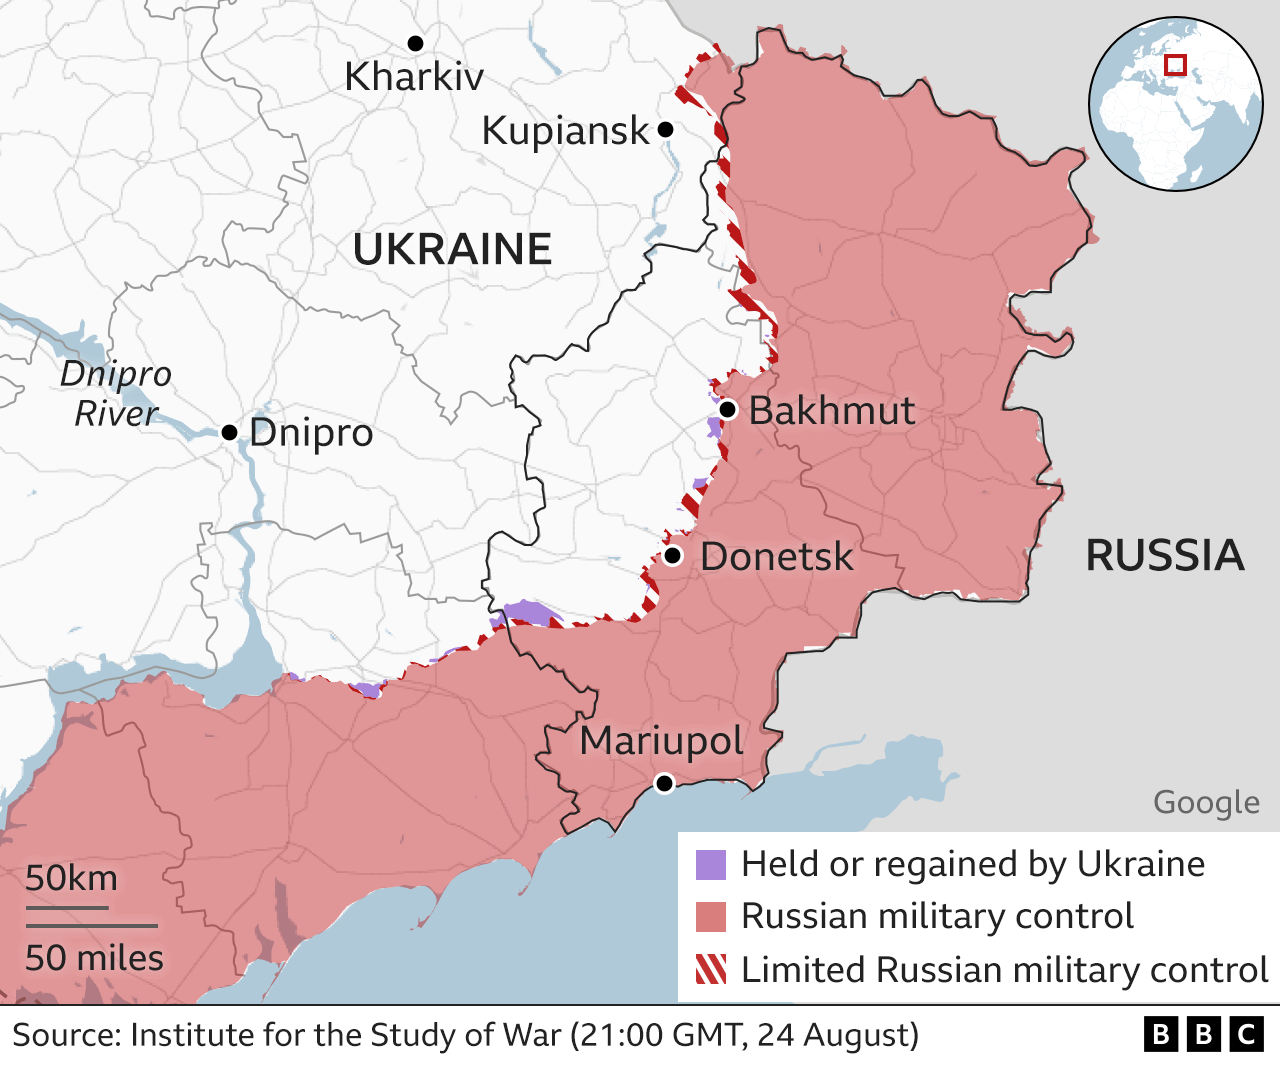 Map of Ukraine, show areas held or regained by Ukraine, under Russian military control and areas with limited Russian military control